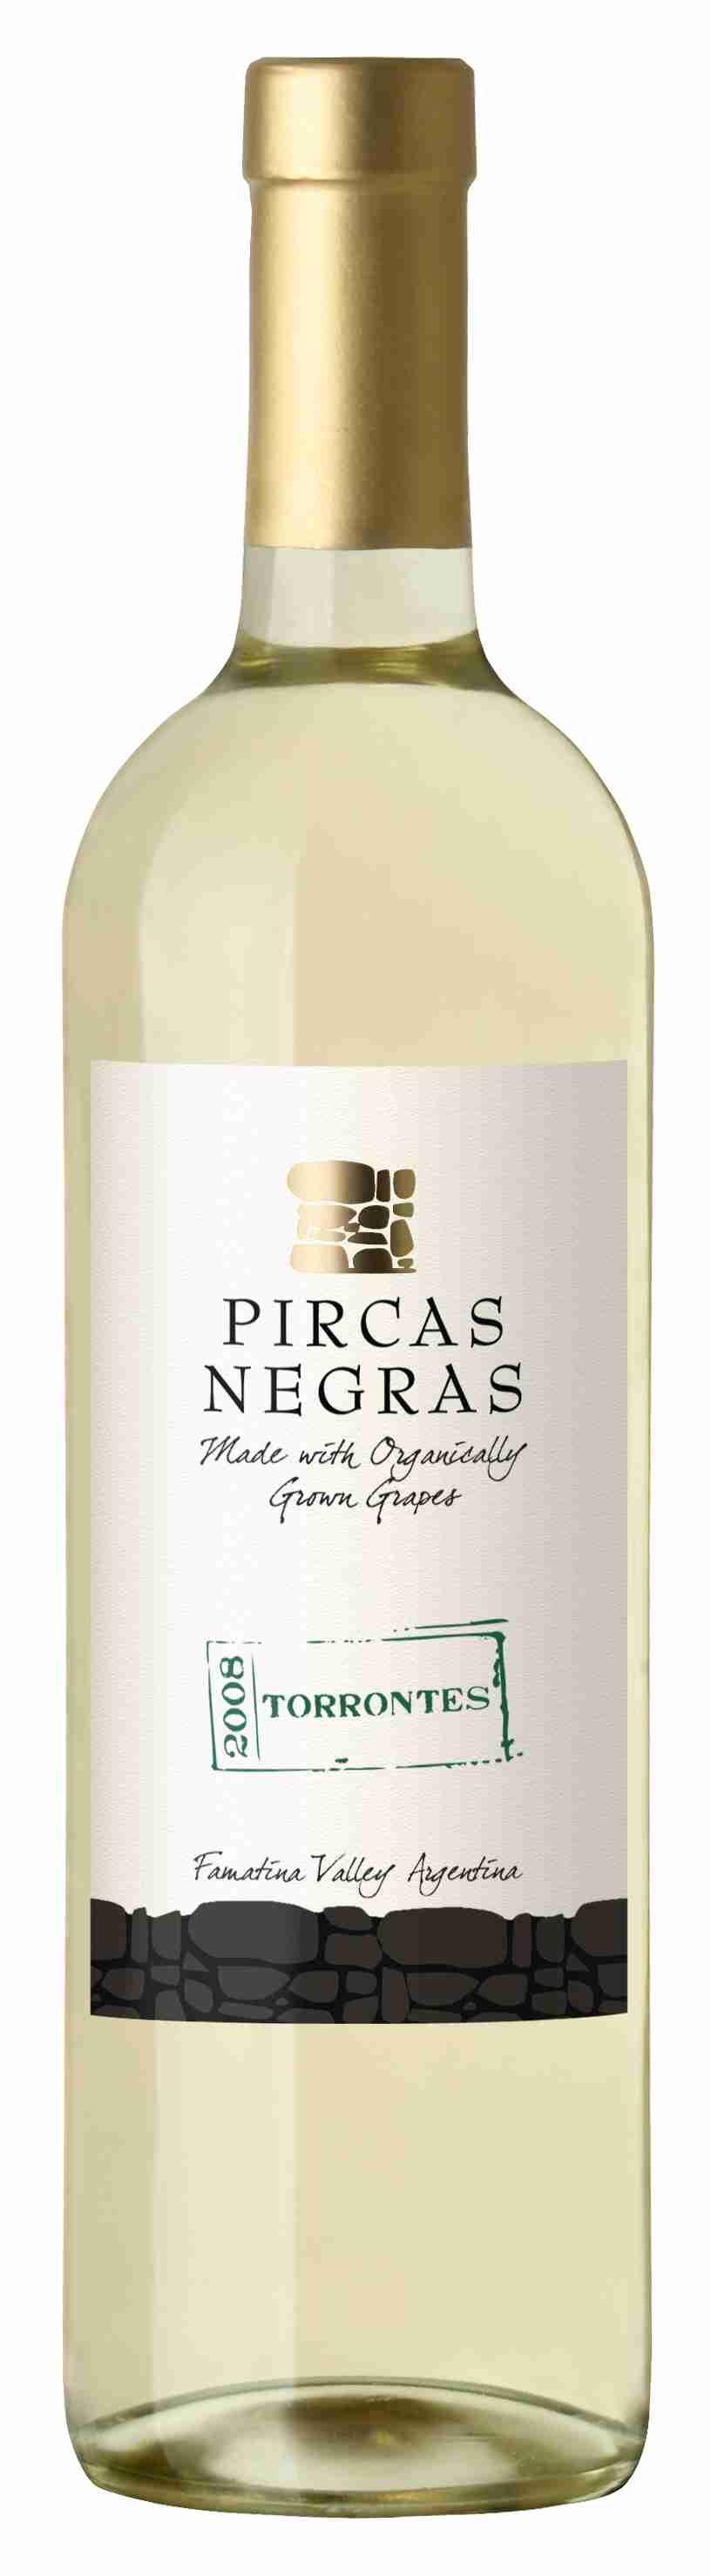 PIRCAS NEGRAS / Organic This range of premium wines takes its name from the